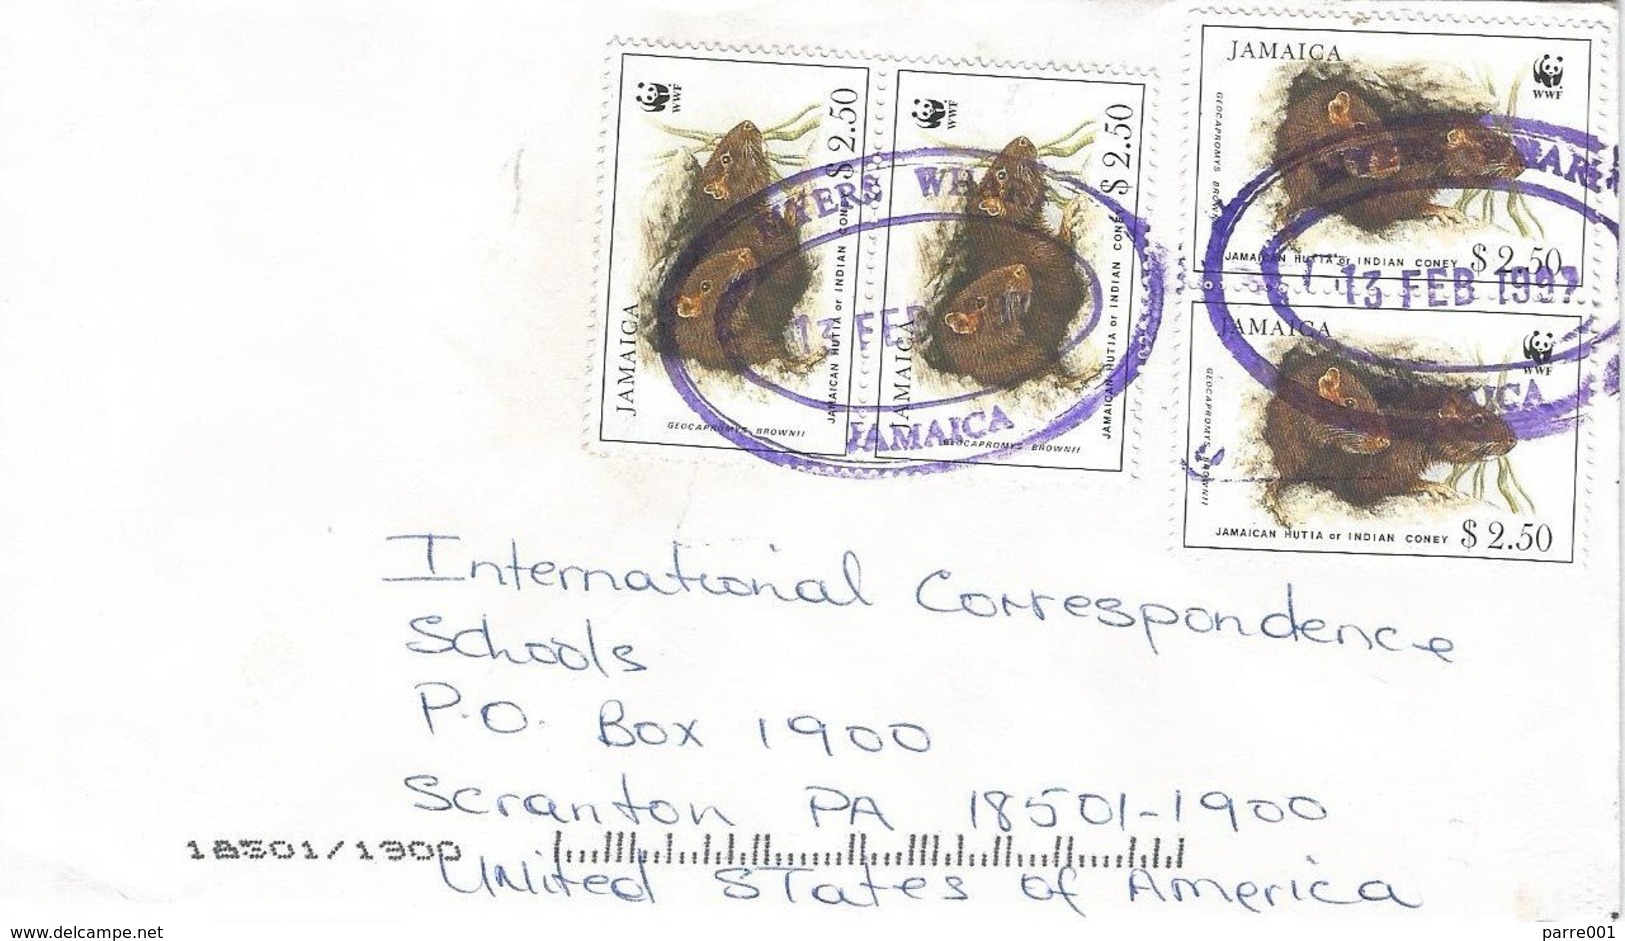 Jamaica 1997 Myers Wharf Jamaican Coney Geocapromys Brownii WWF Cover - Covers & Documents